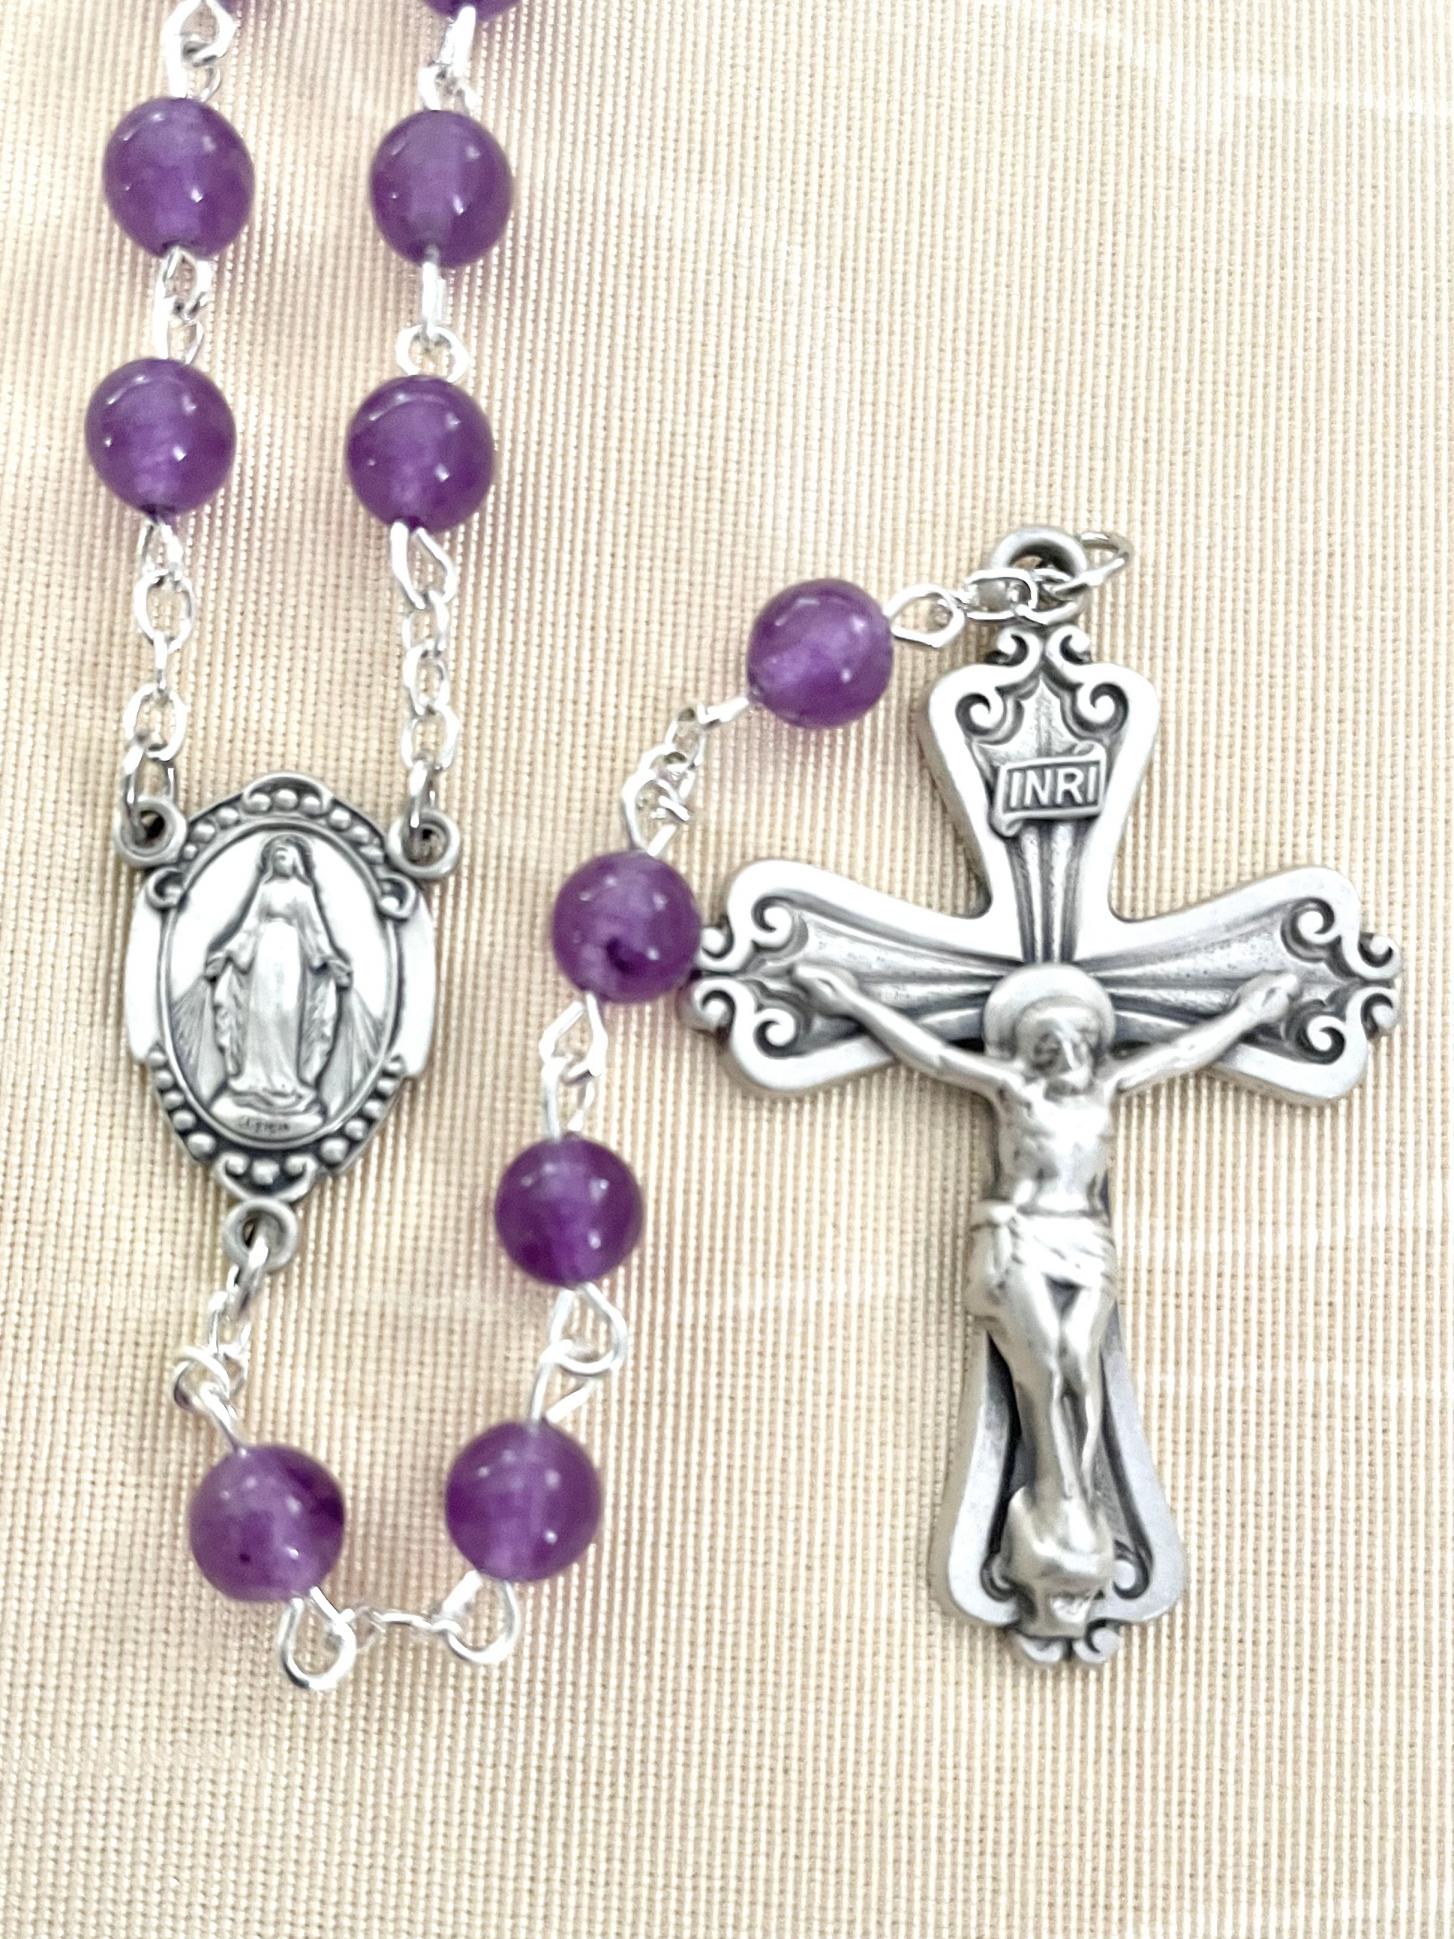 6mm AMETHYST GEMSTONE ROSARY WITH STERLING SILVER CRUCIFIX AND CENTER GIFT BOXED